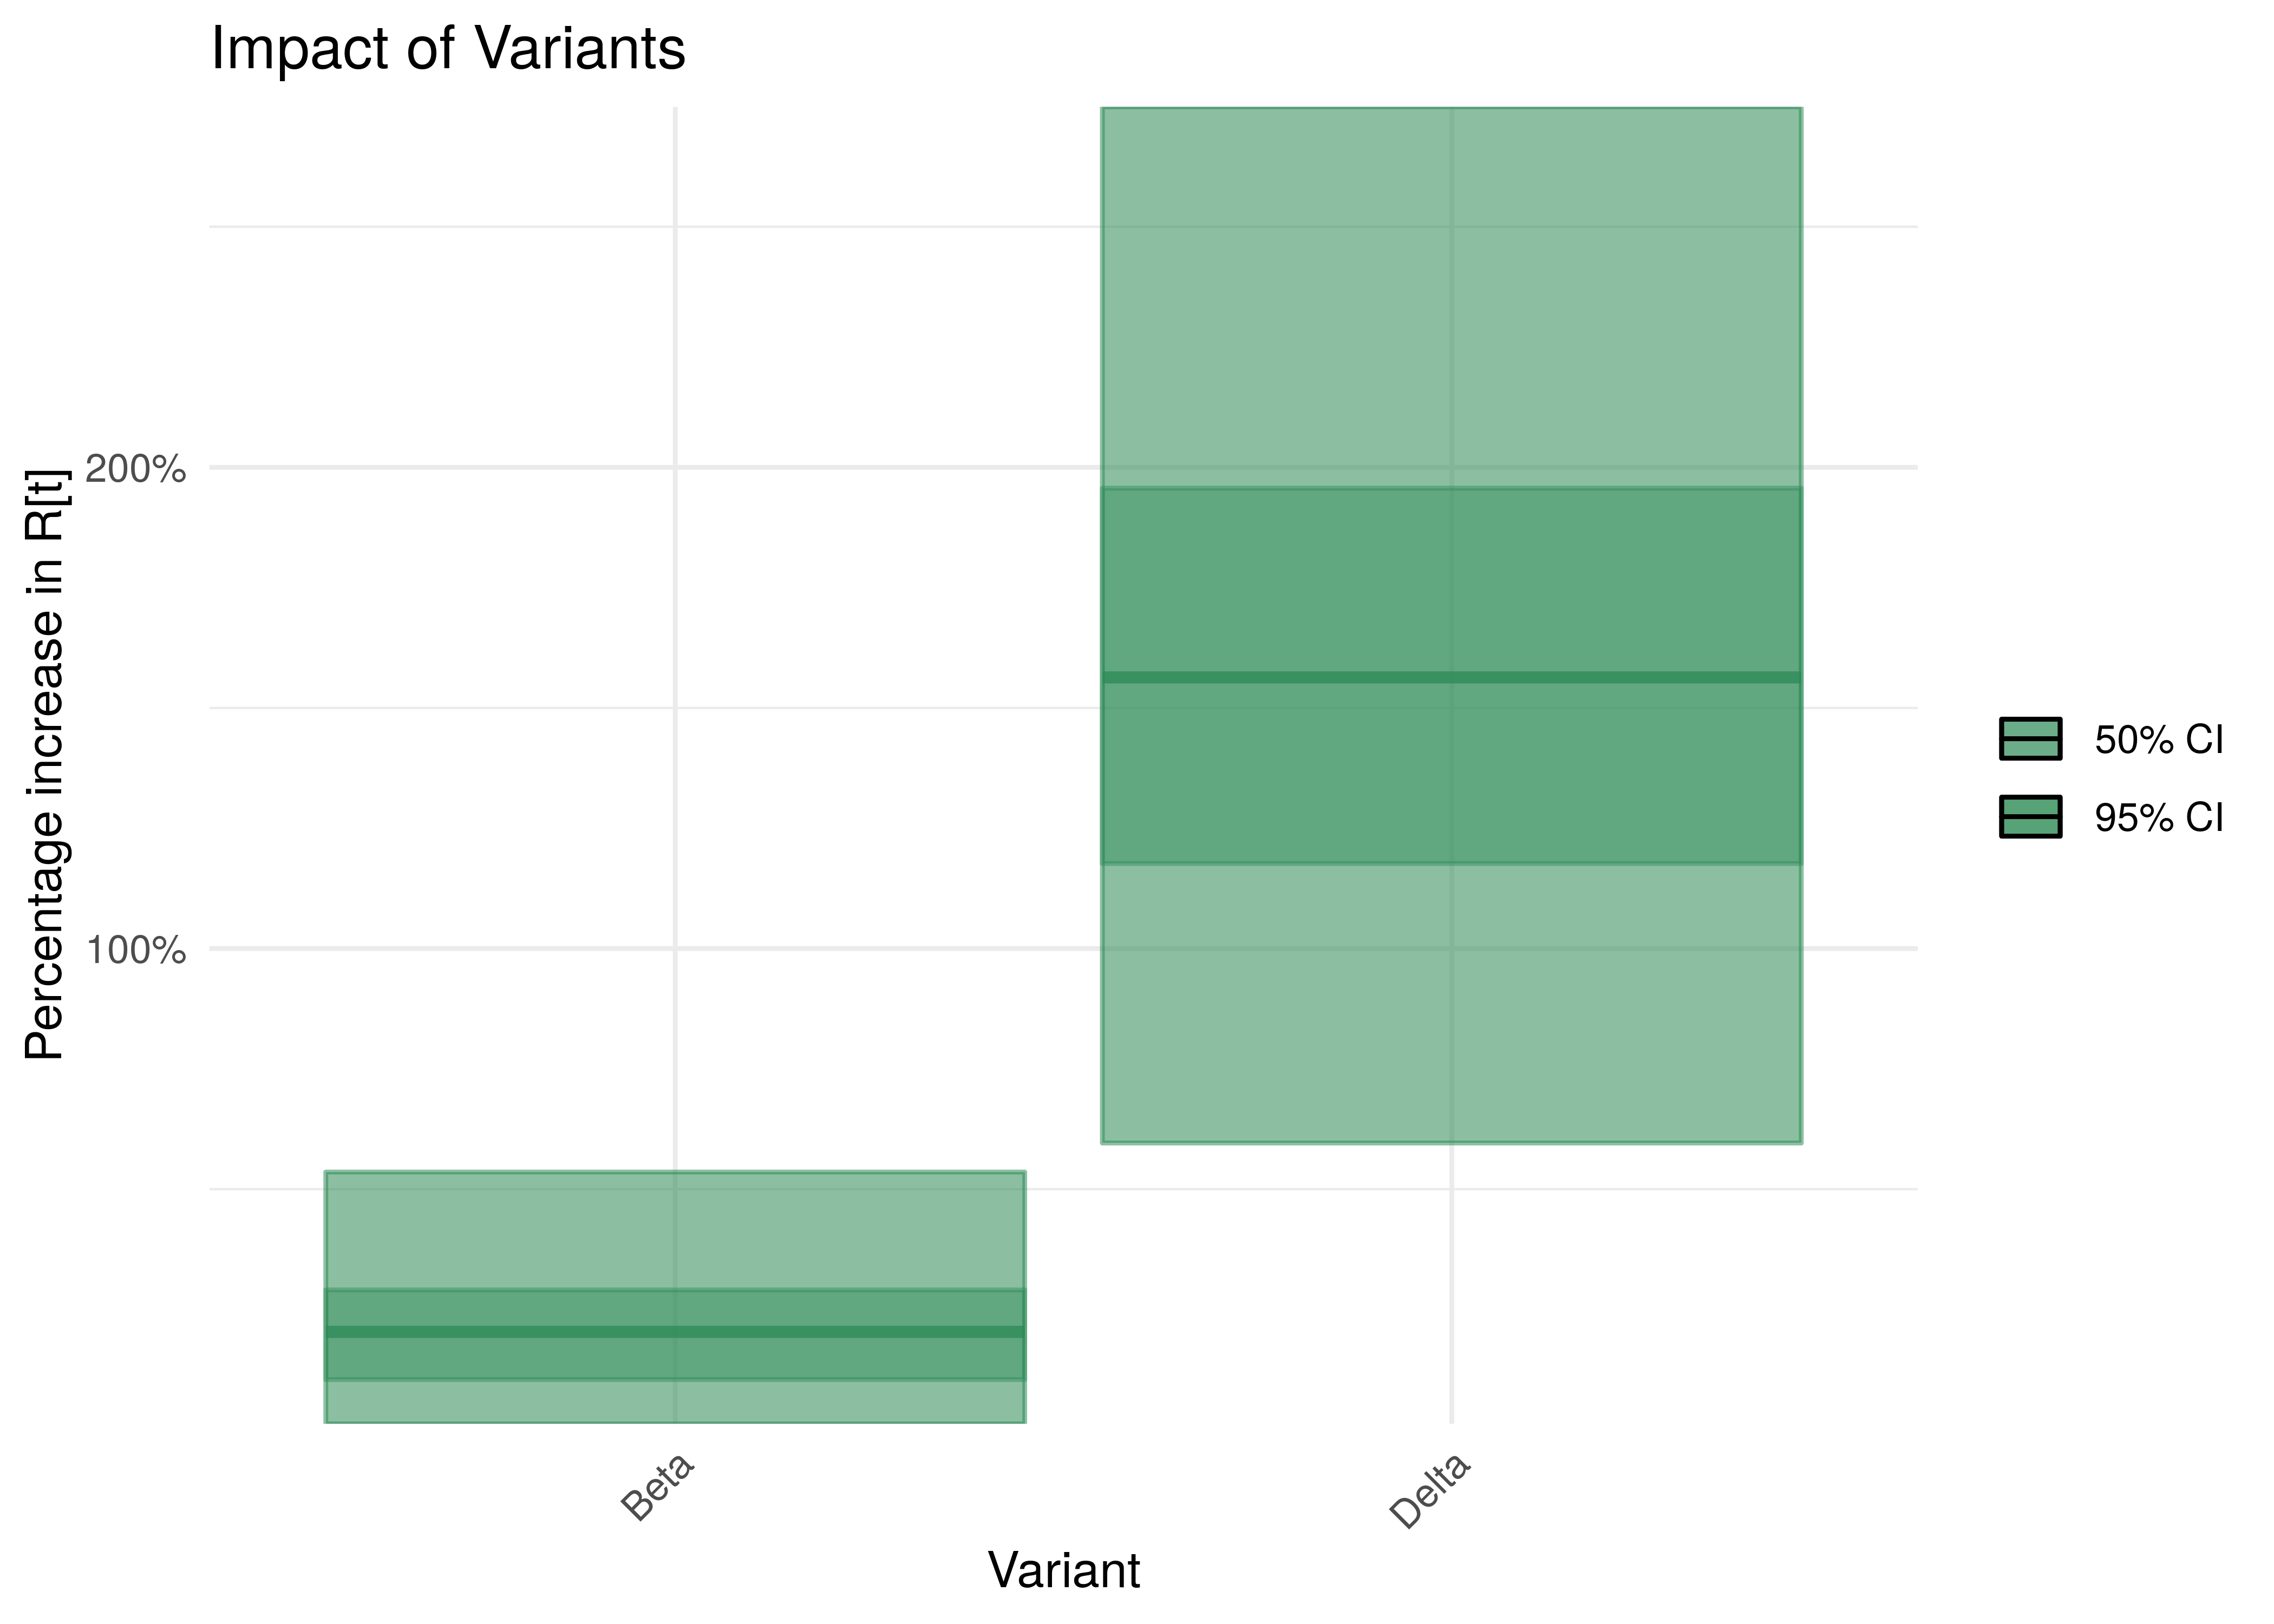 Impact of Variants with 95% Confidence Intervals